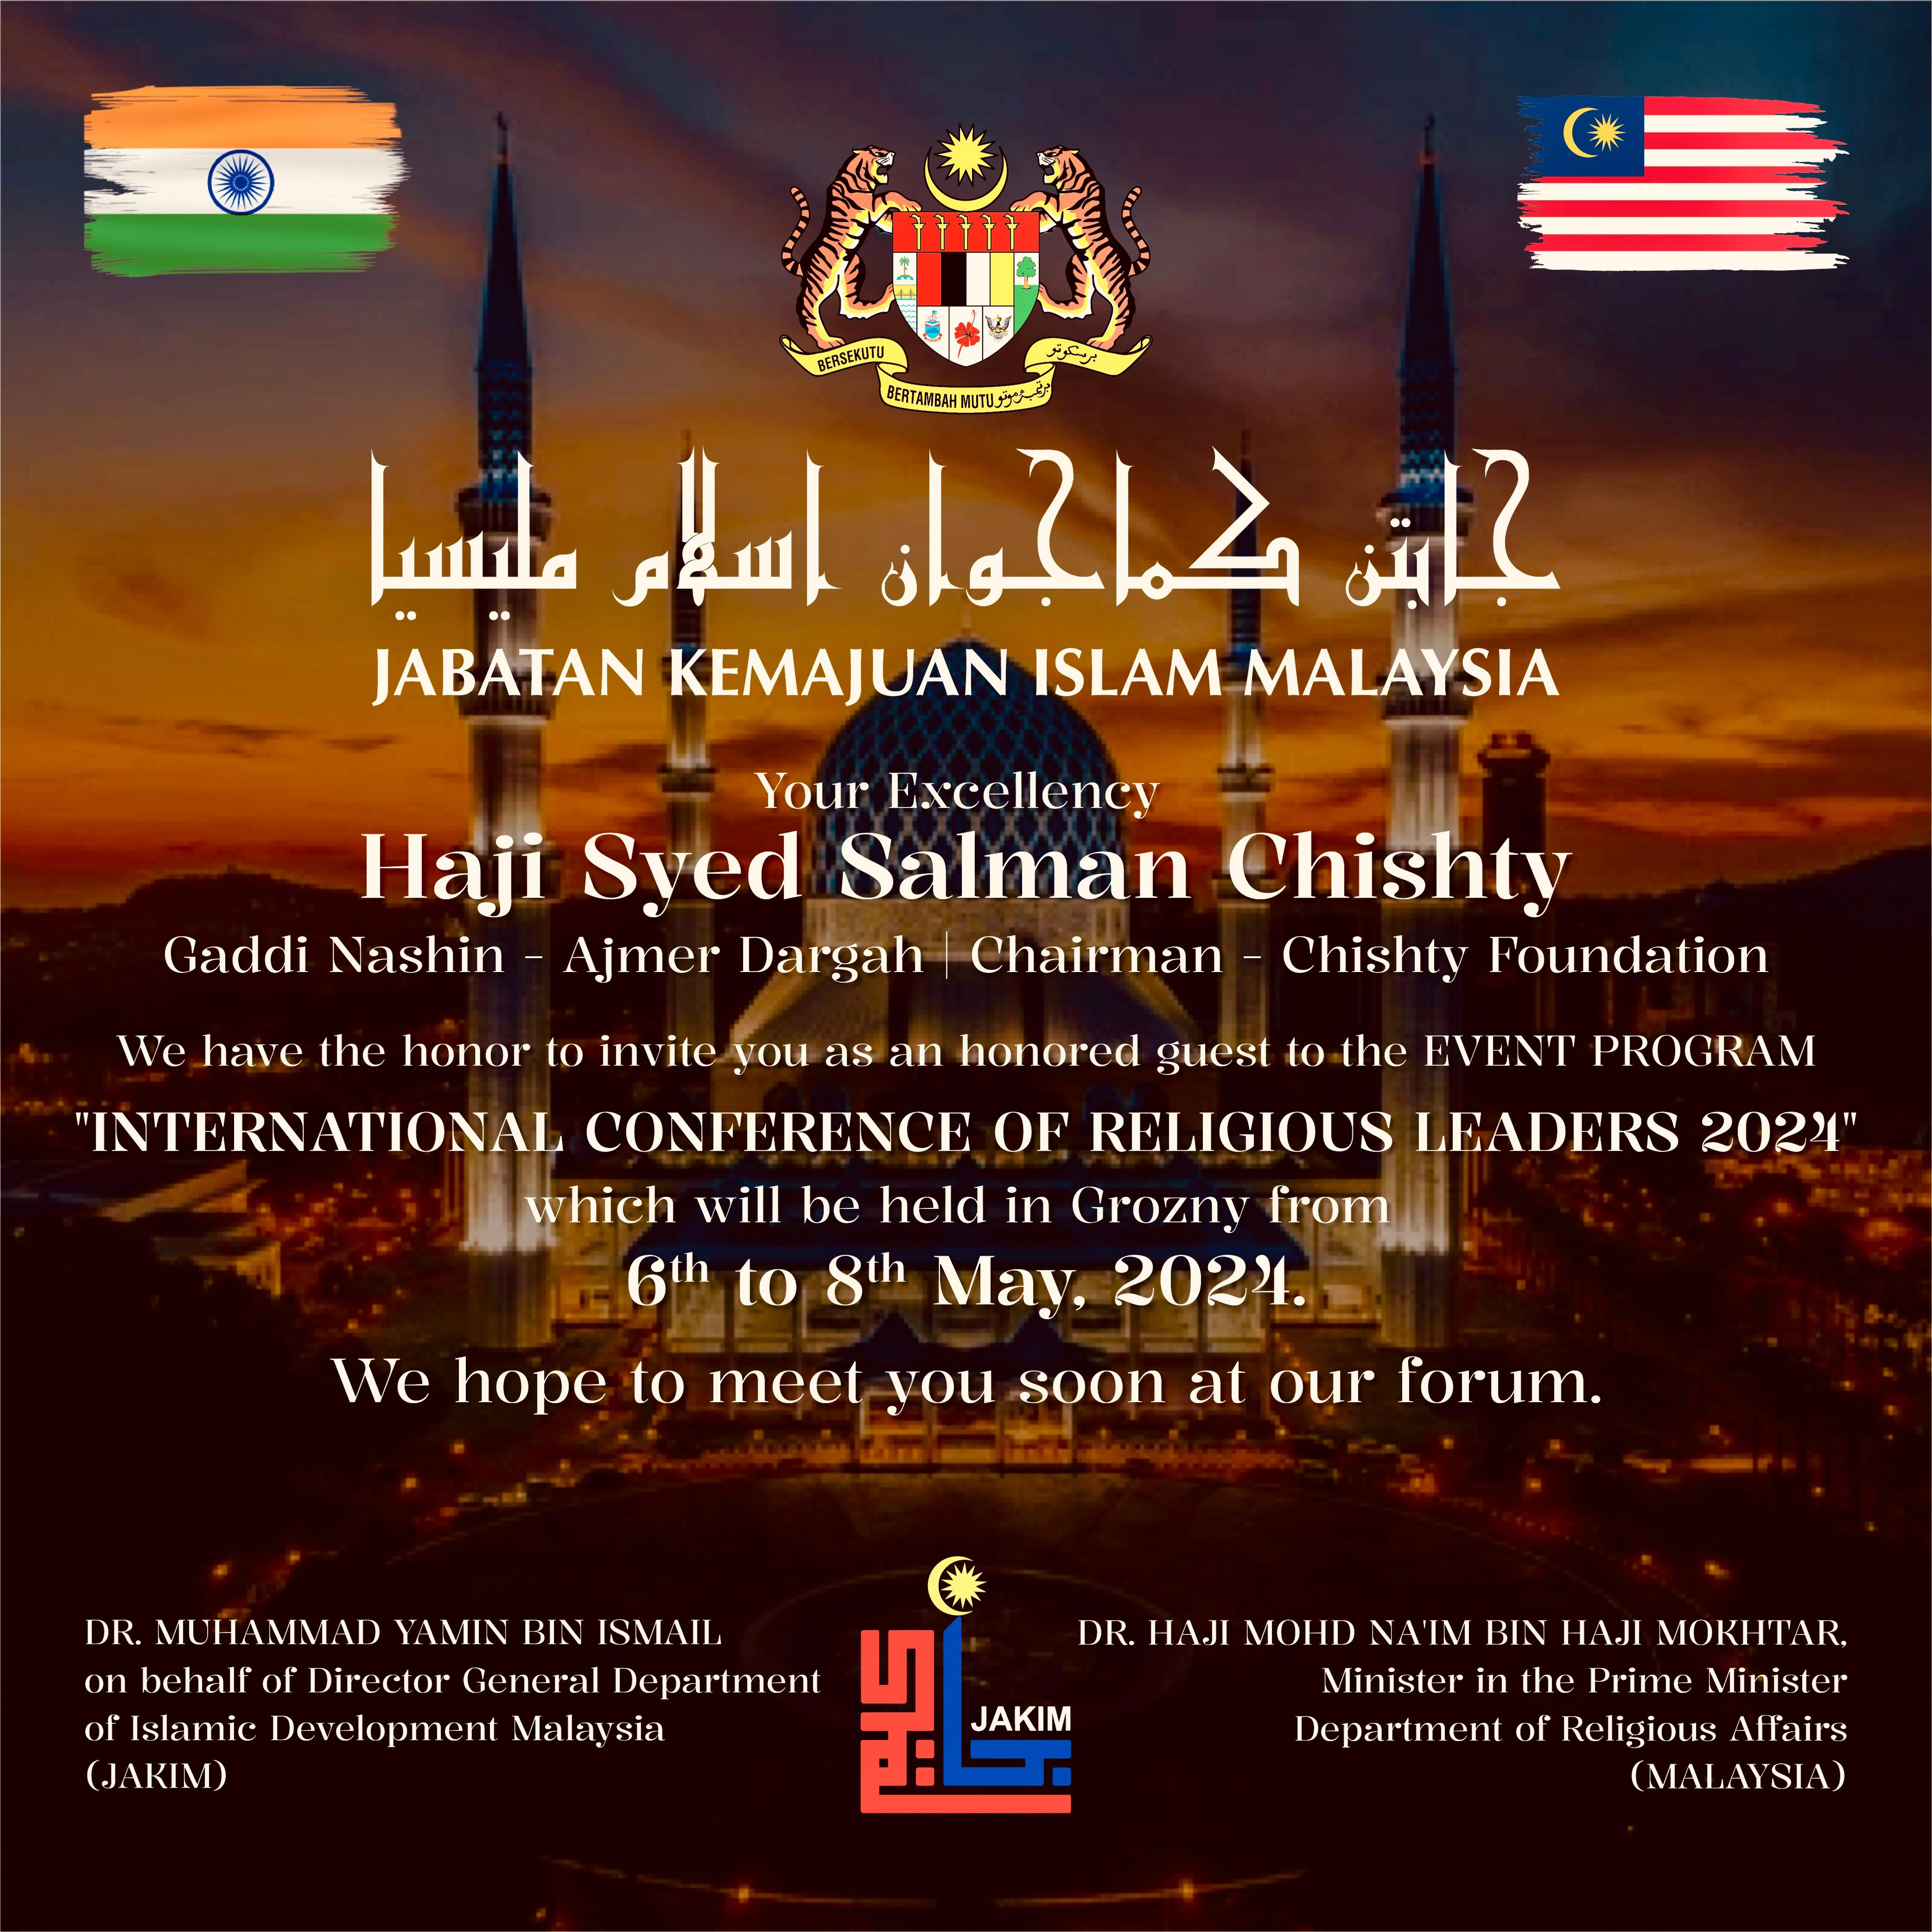 https://www.hindi.awazthevoice.in/upload/news/171482636221_Malaysia_and_Muslim_World_League_to_hold_international_interreligious_conference_on_May_7,_Syed_Salman_Chishti_from_India_will_participate_2.jfif